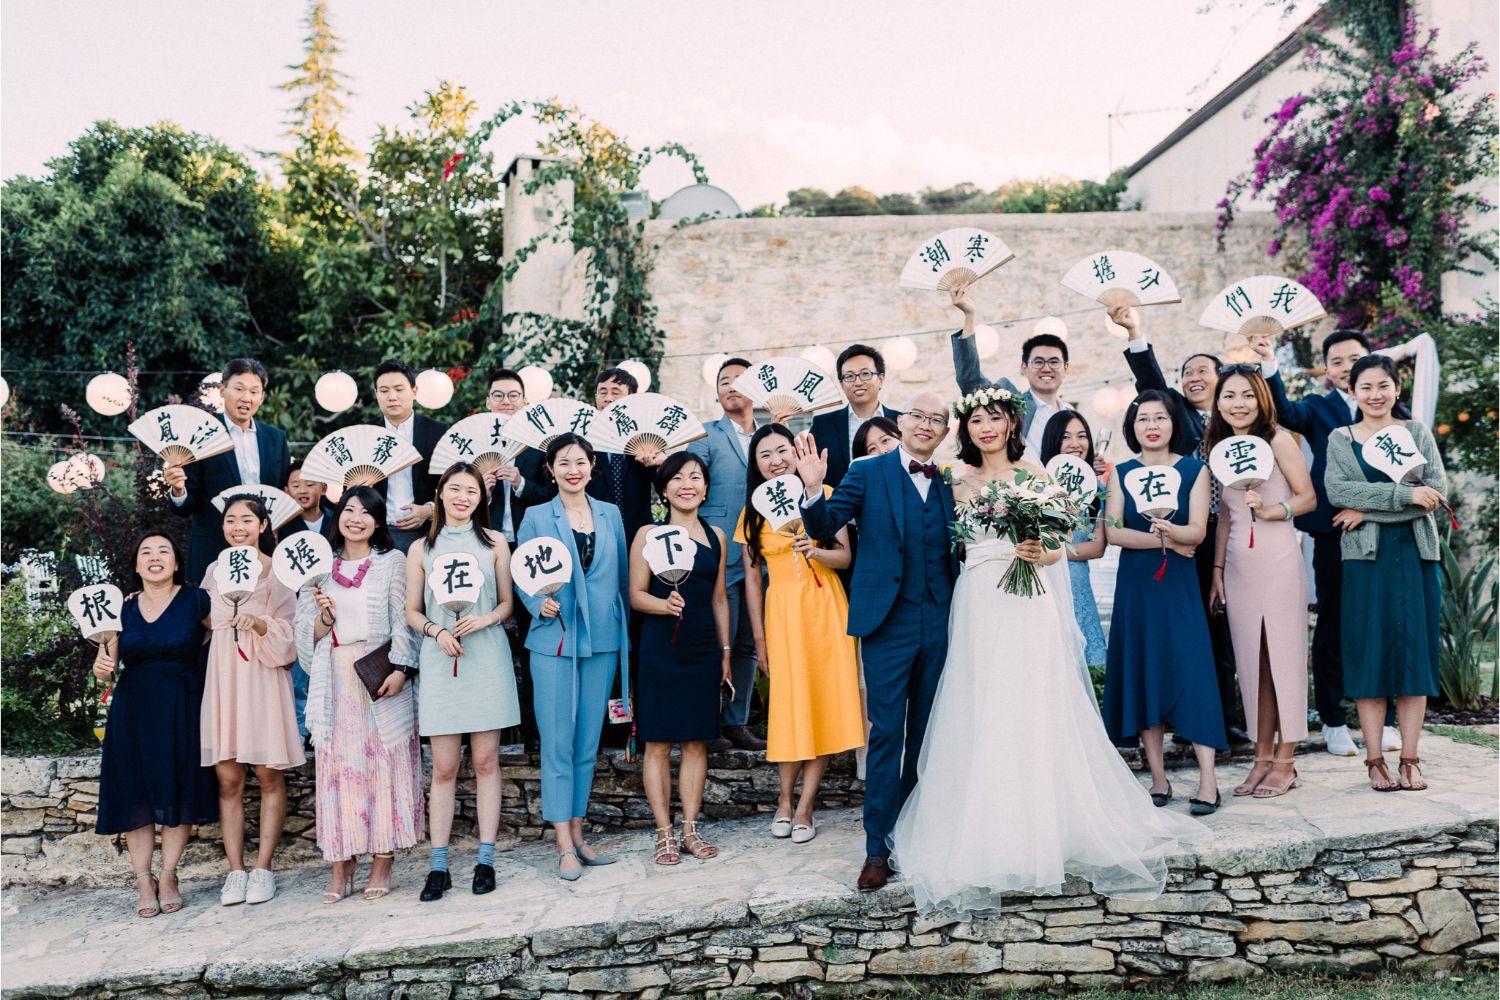 Chinese wedding in traditional mountain rustic villa in Crete